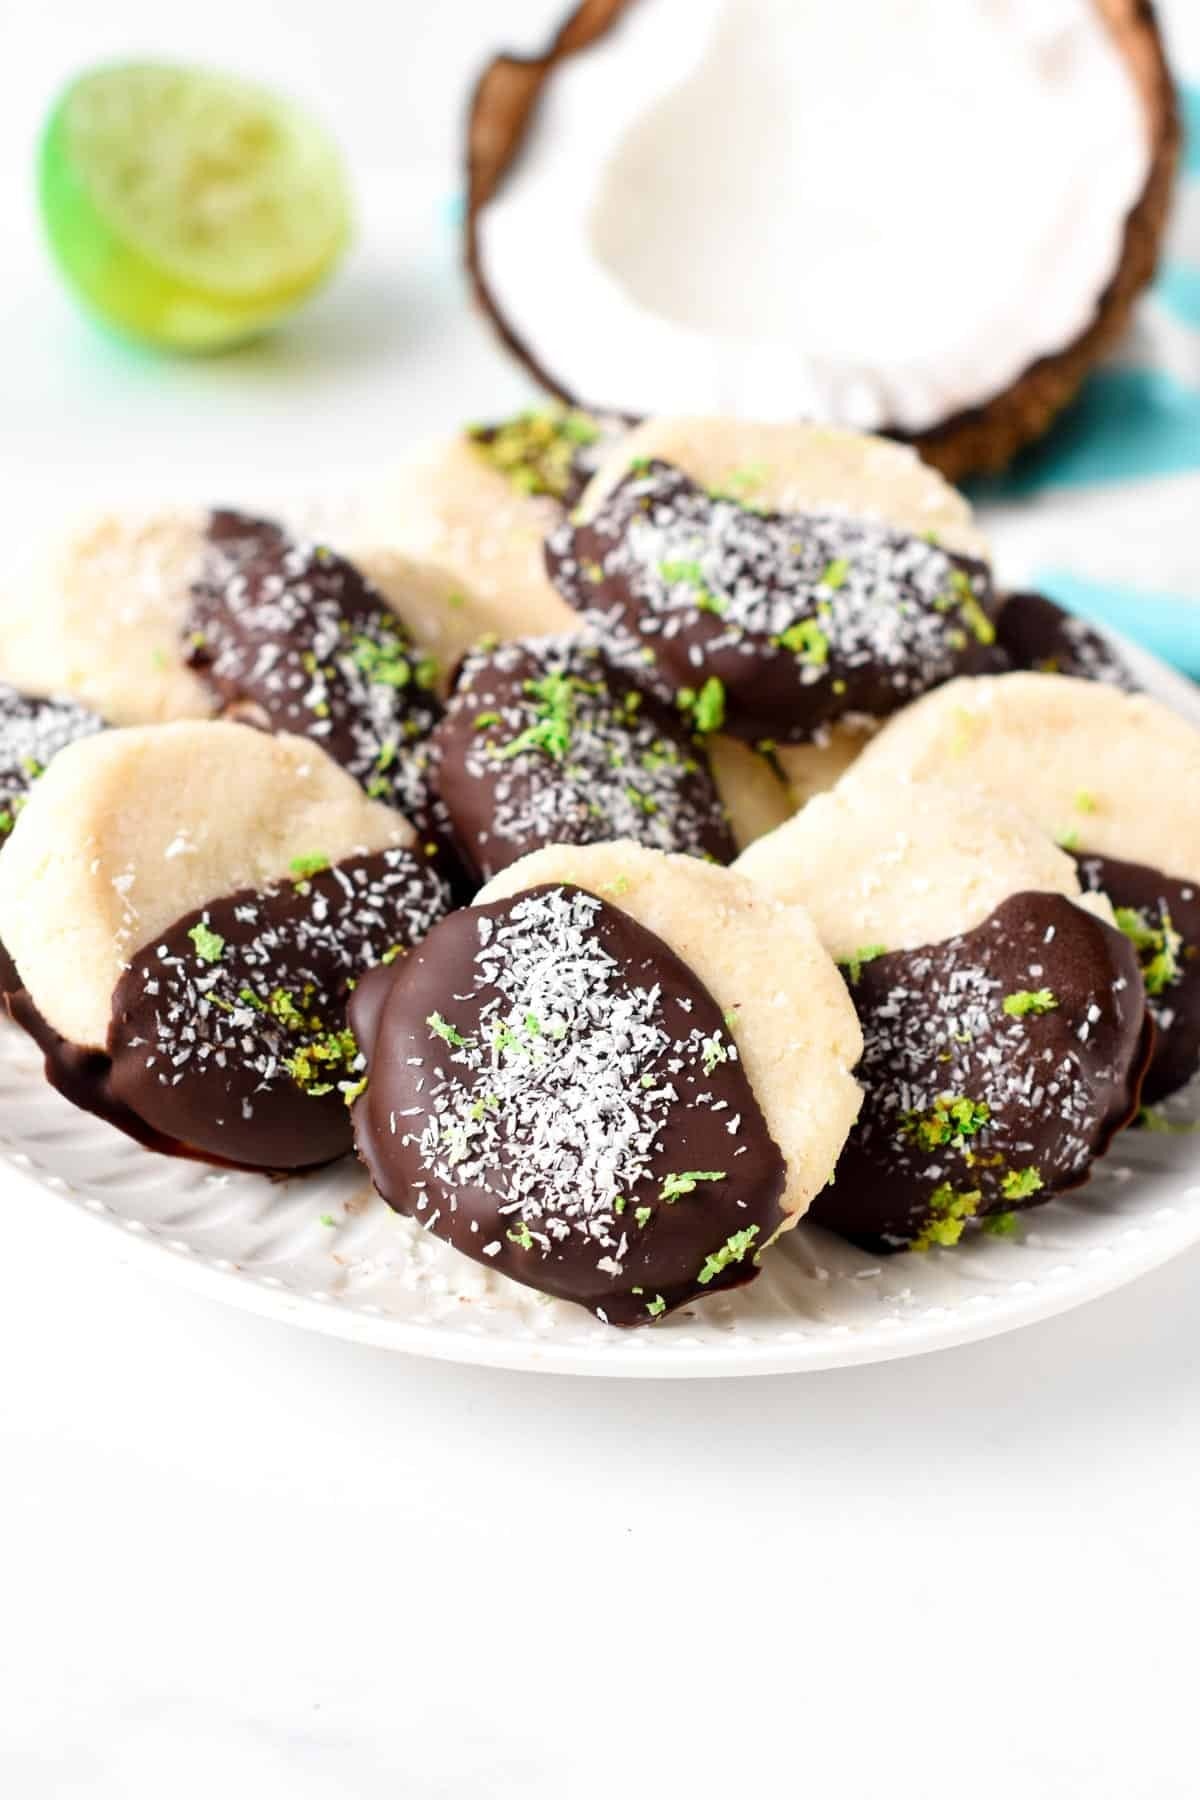 Coconut cookies half dipped in melted chocolate garnished with shredded coconut.